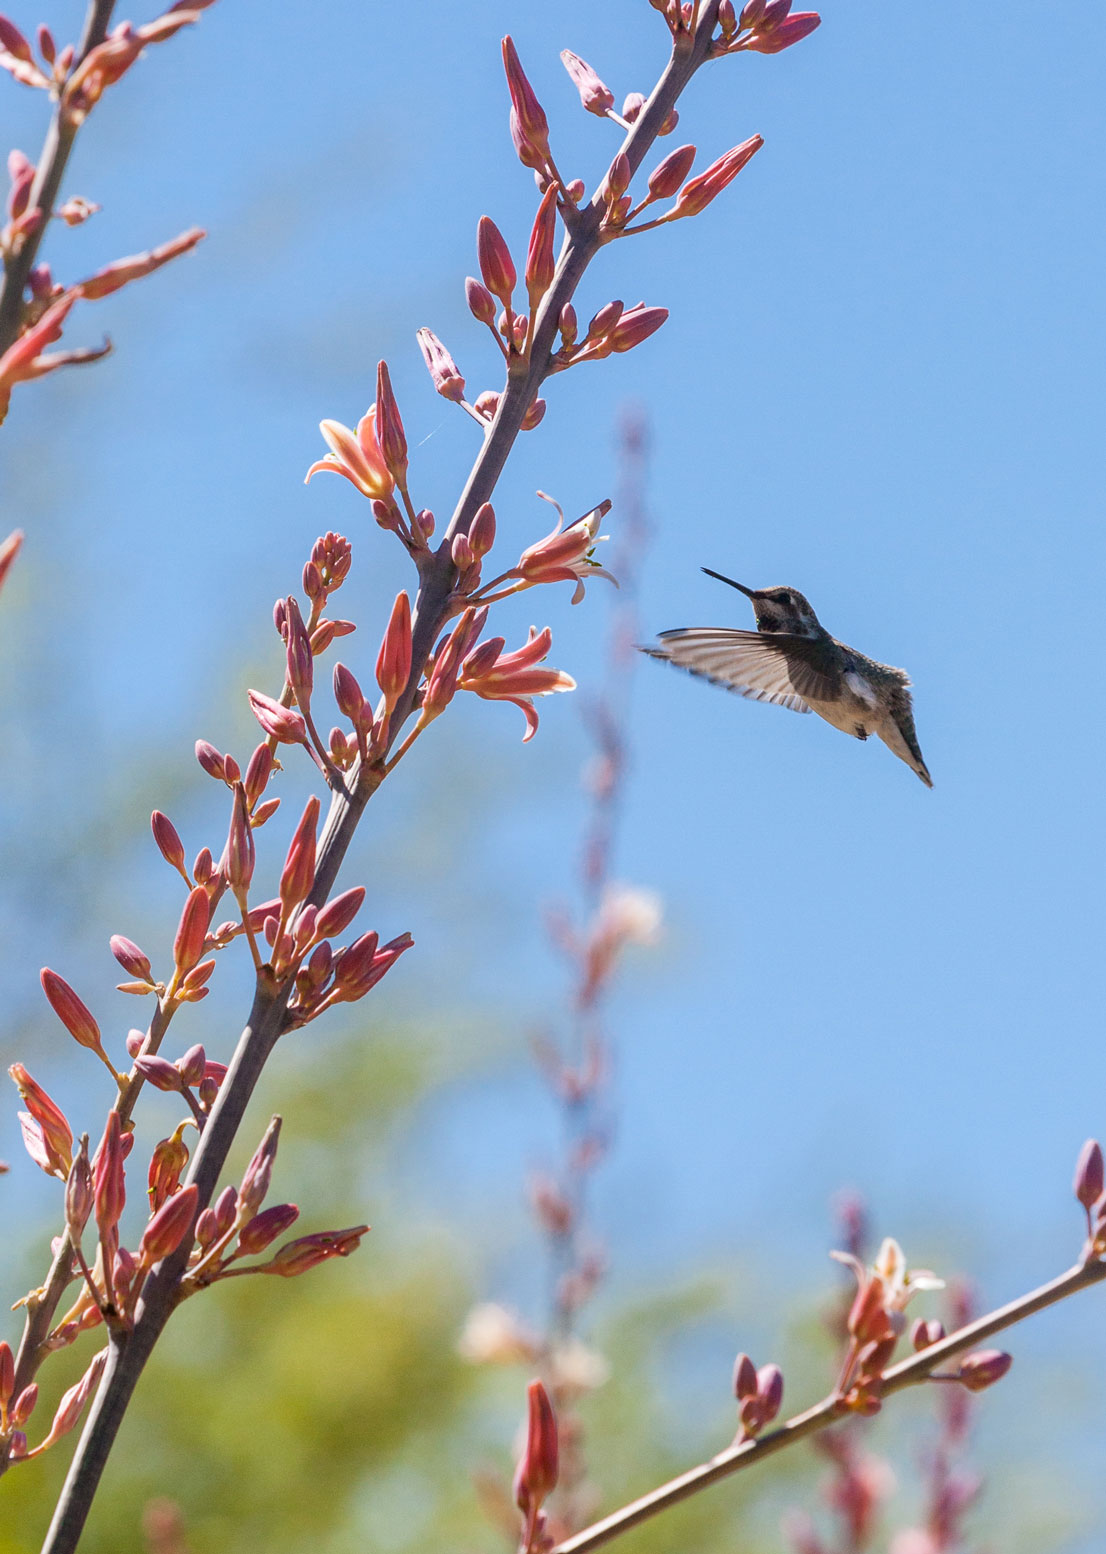 A hummingbird looking for nectar from Red Hesperaloe flowers.